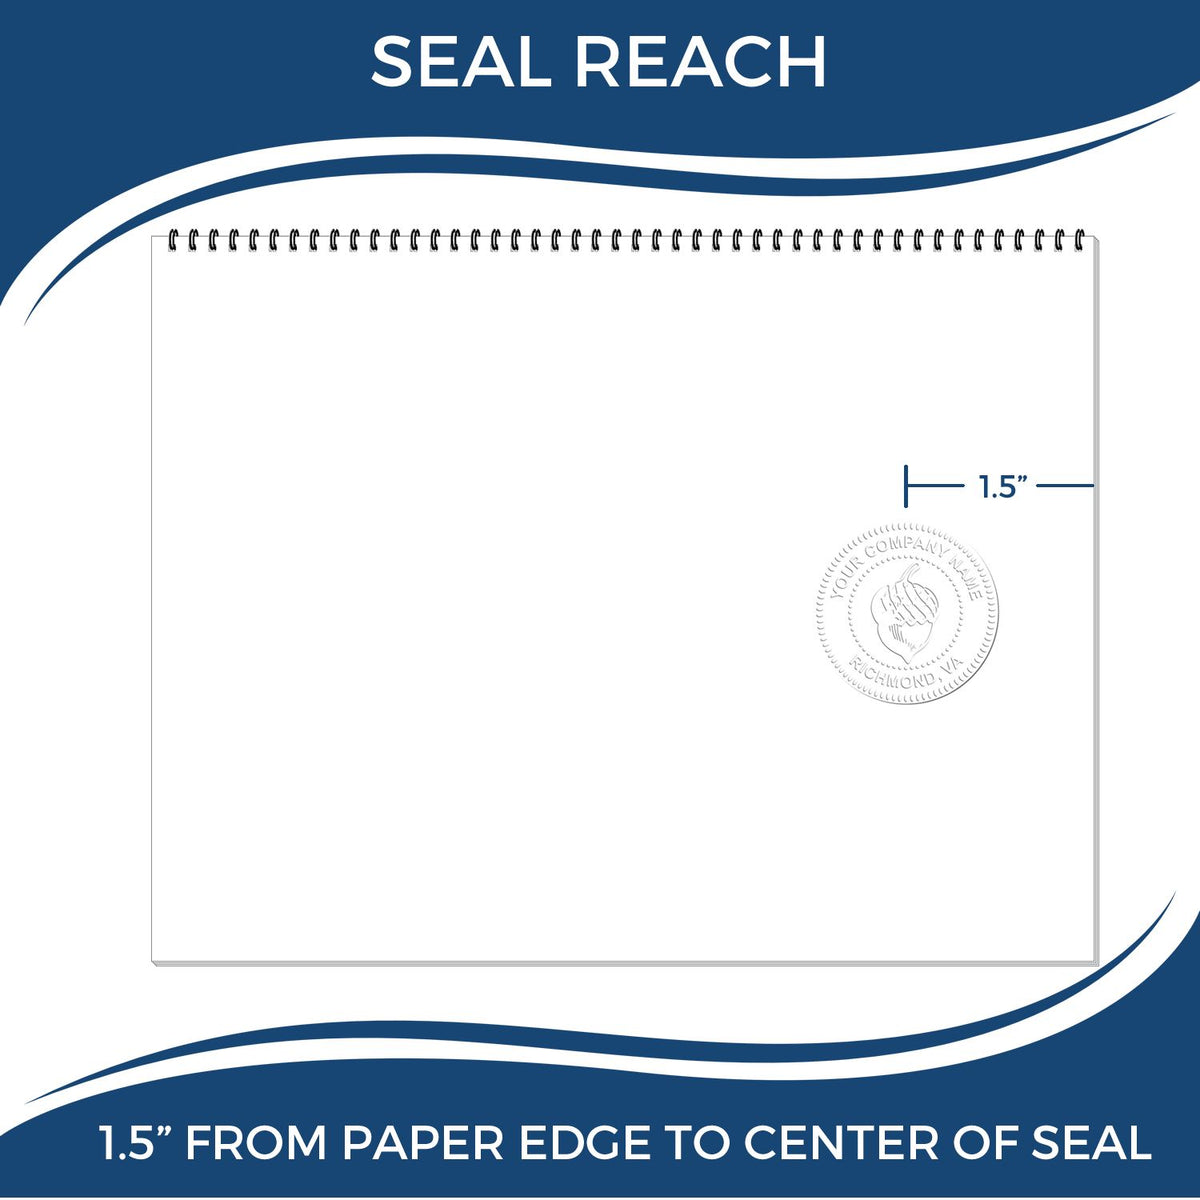 An infographic showing the seal reach which is represented by a ruler and a miniature seal image of the Michigan Desk Architect Embossing Seal